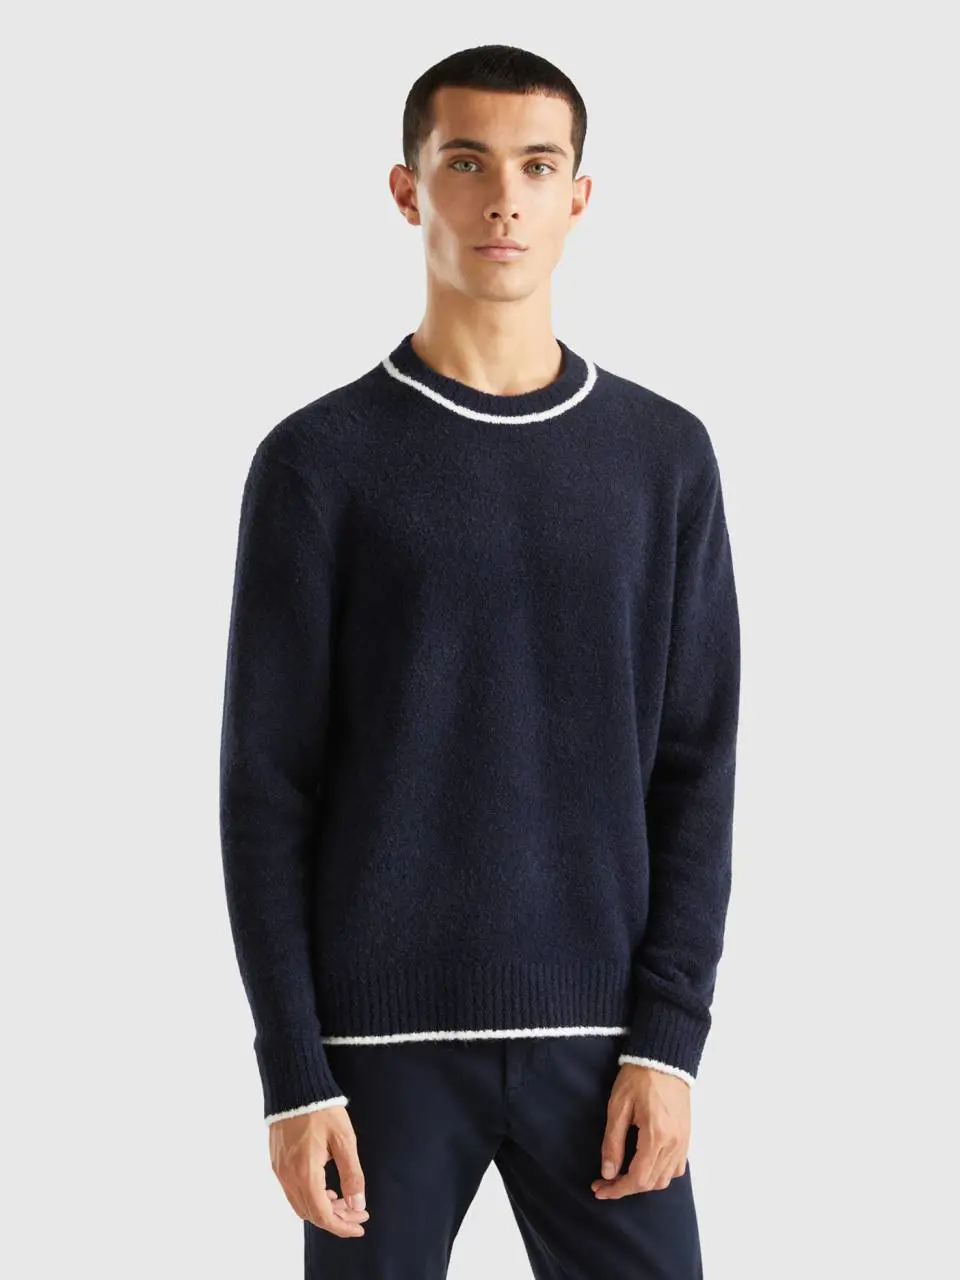 Benetton sweater in wool and viscose blend. 1